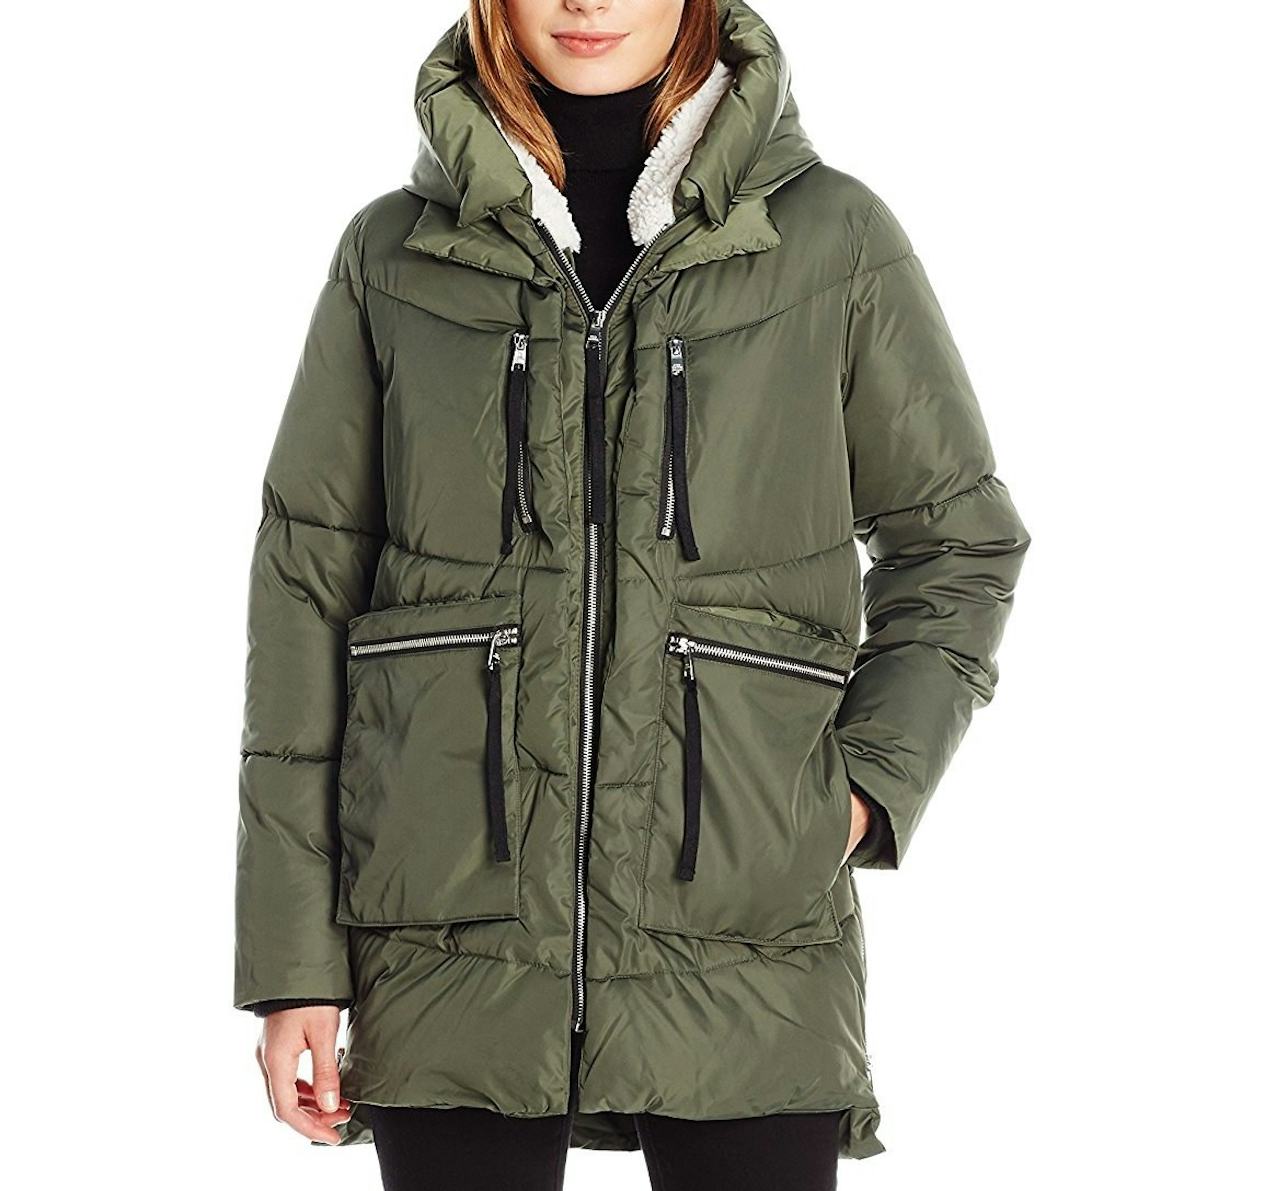 15 Warm Winter Coats Under $100 That Will Actually Keep You Toasty